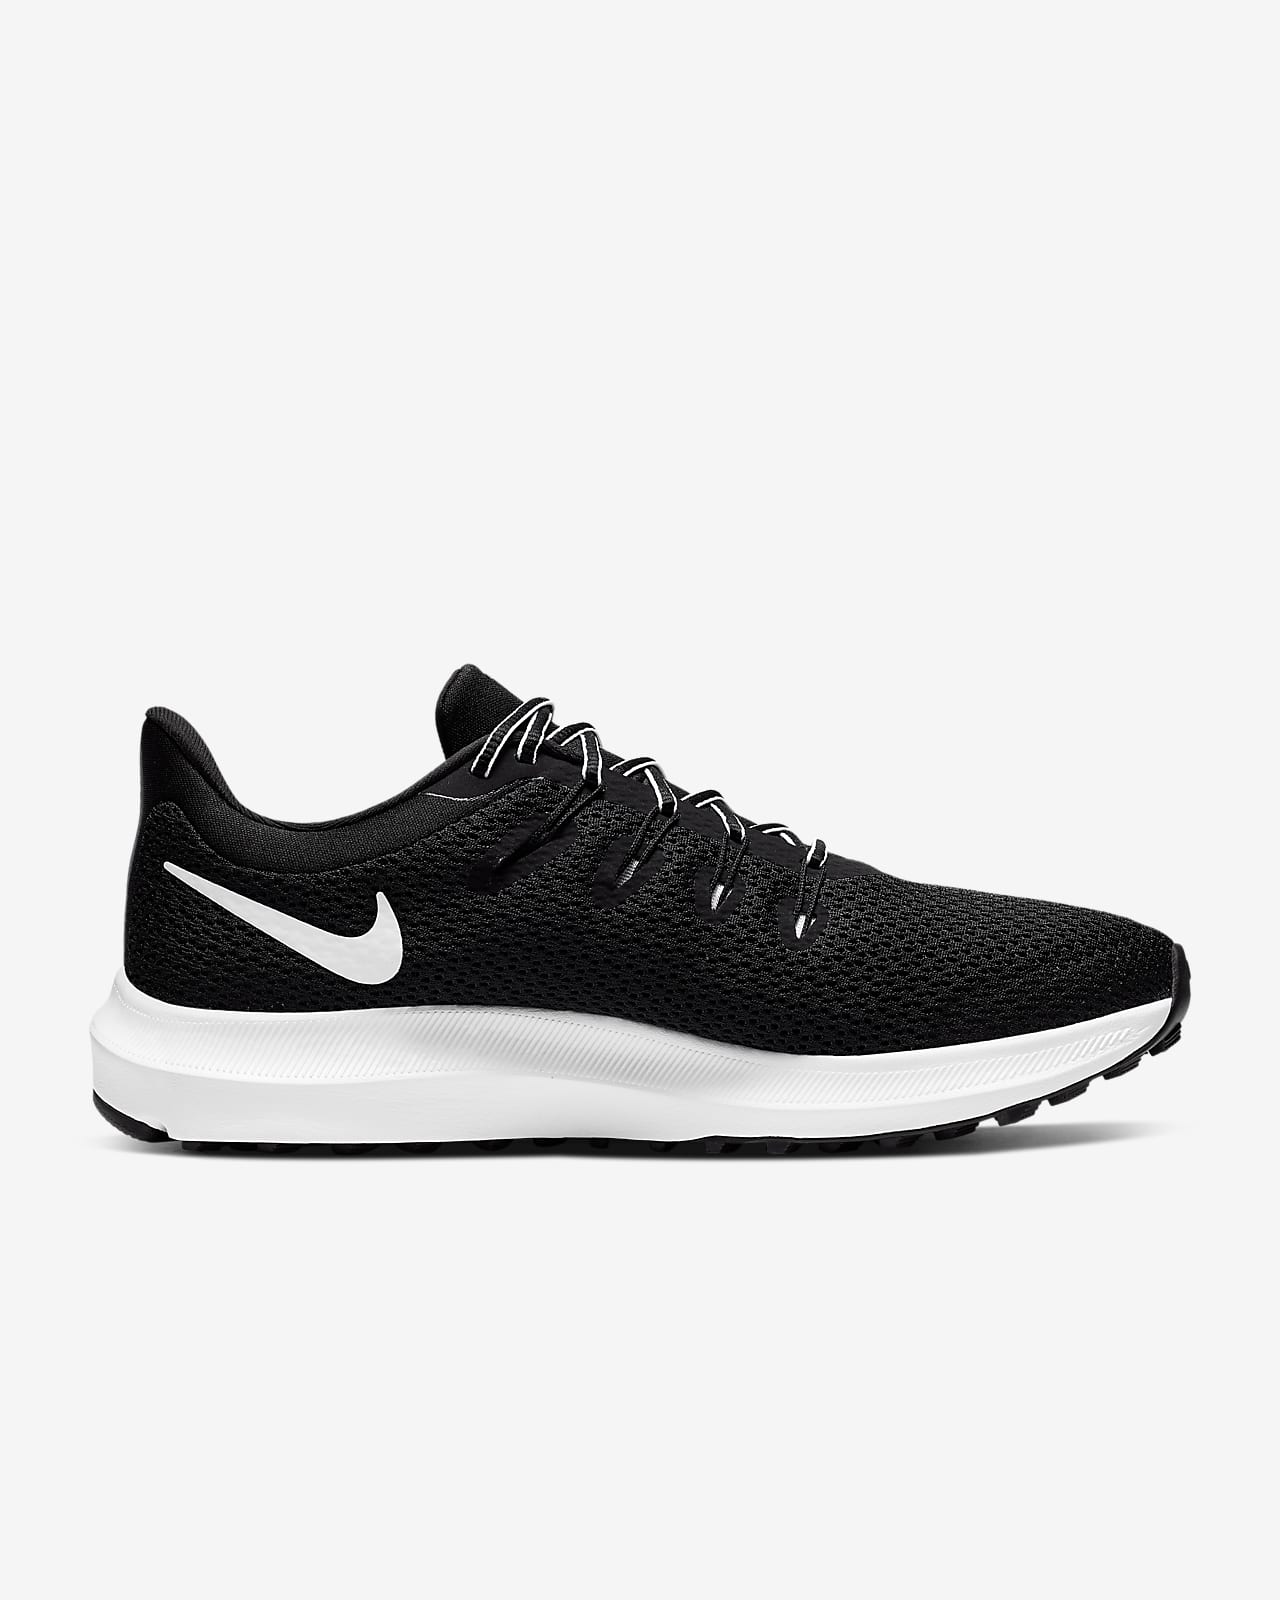 nike quest ladies running shoes